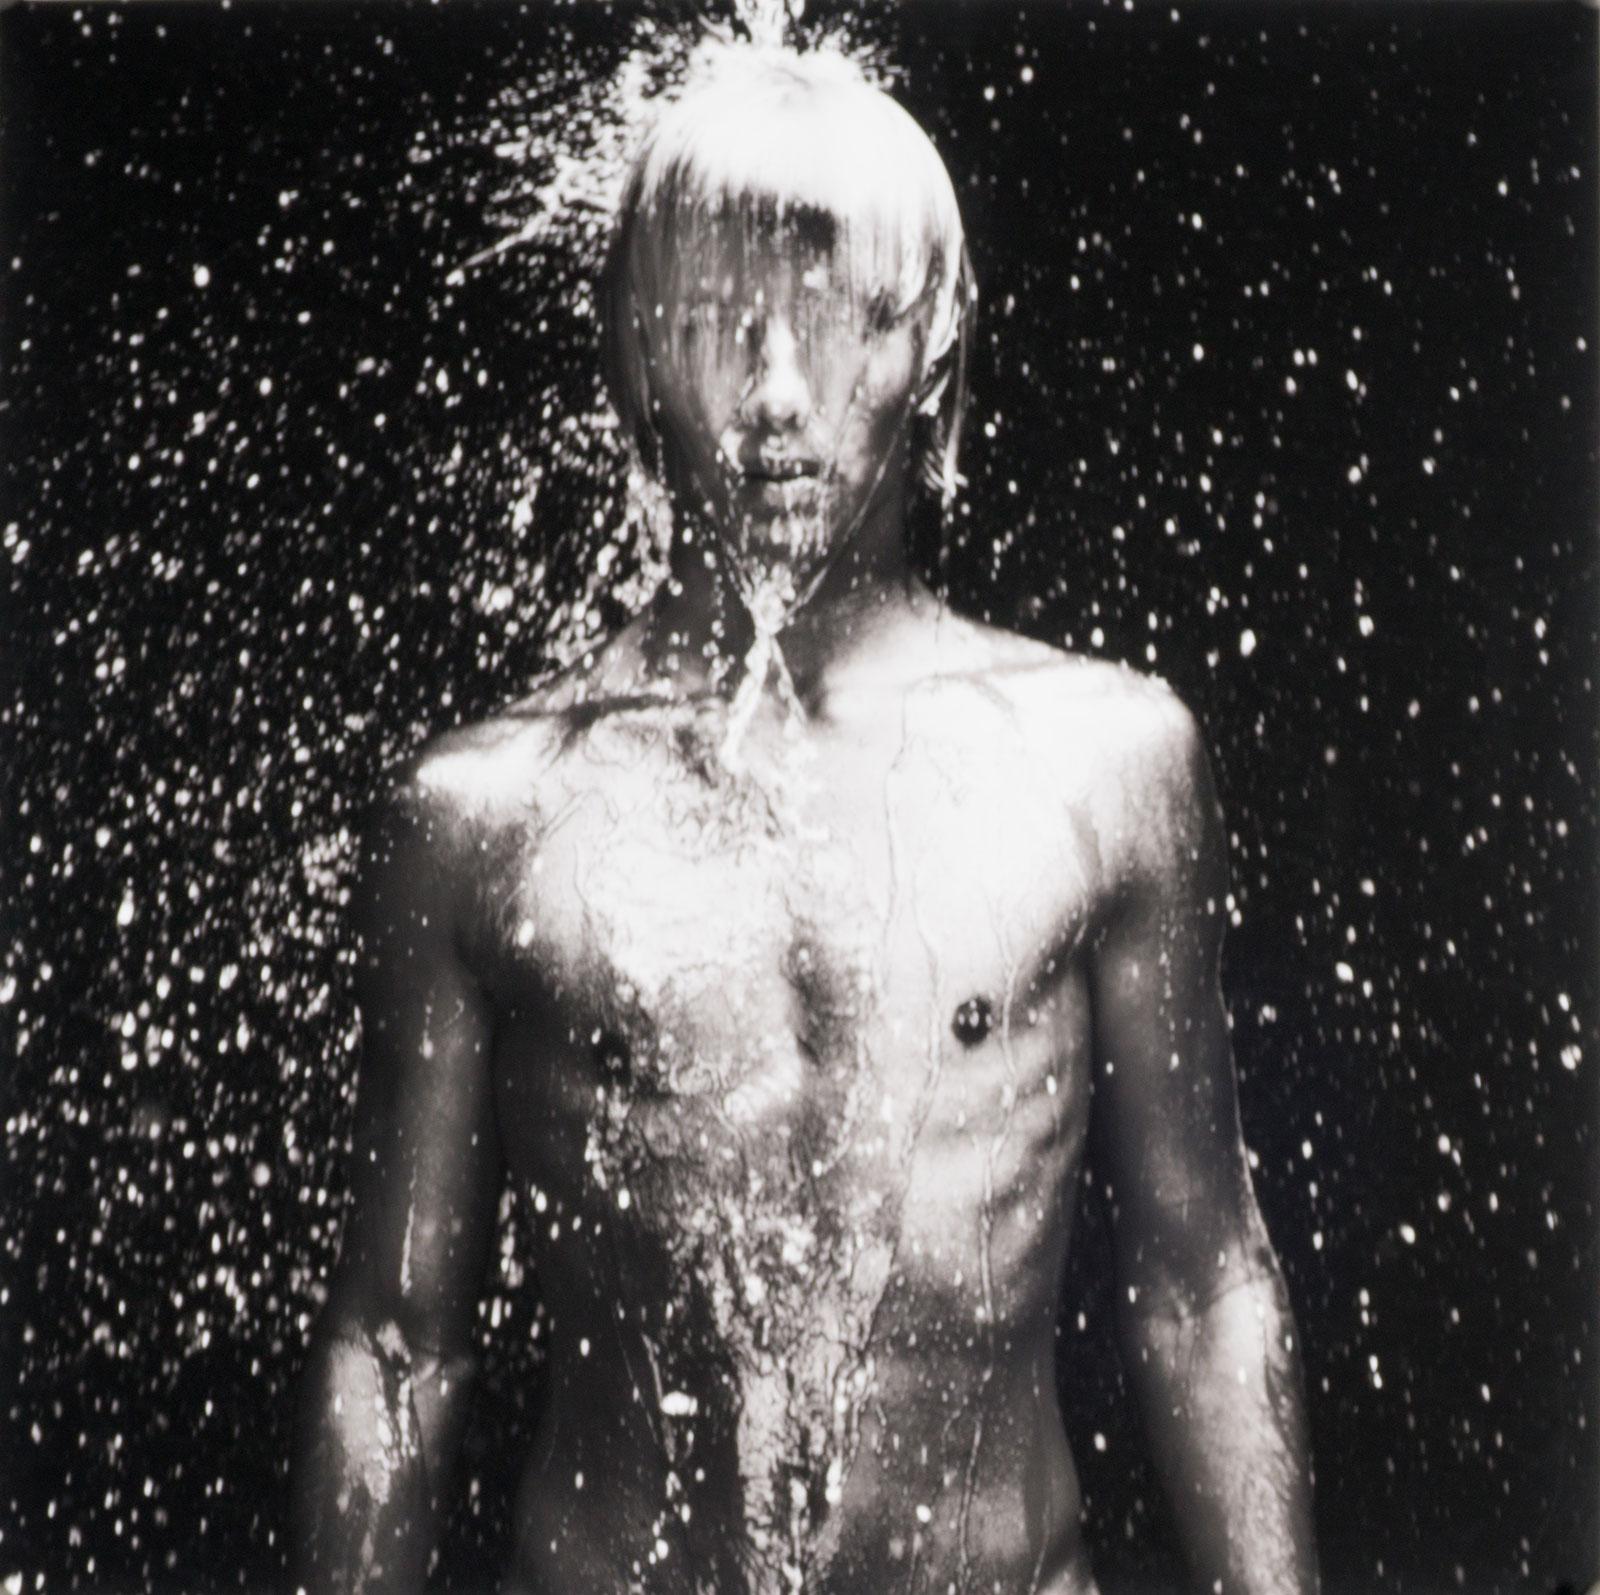 Benno Thoma Black and White Photograph - WET 11 (young nude Dutch boy being doused by droplets of water)